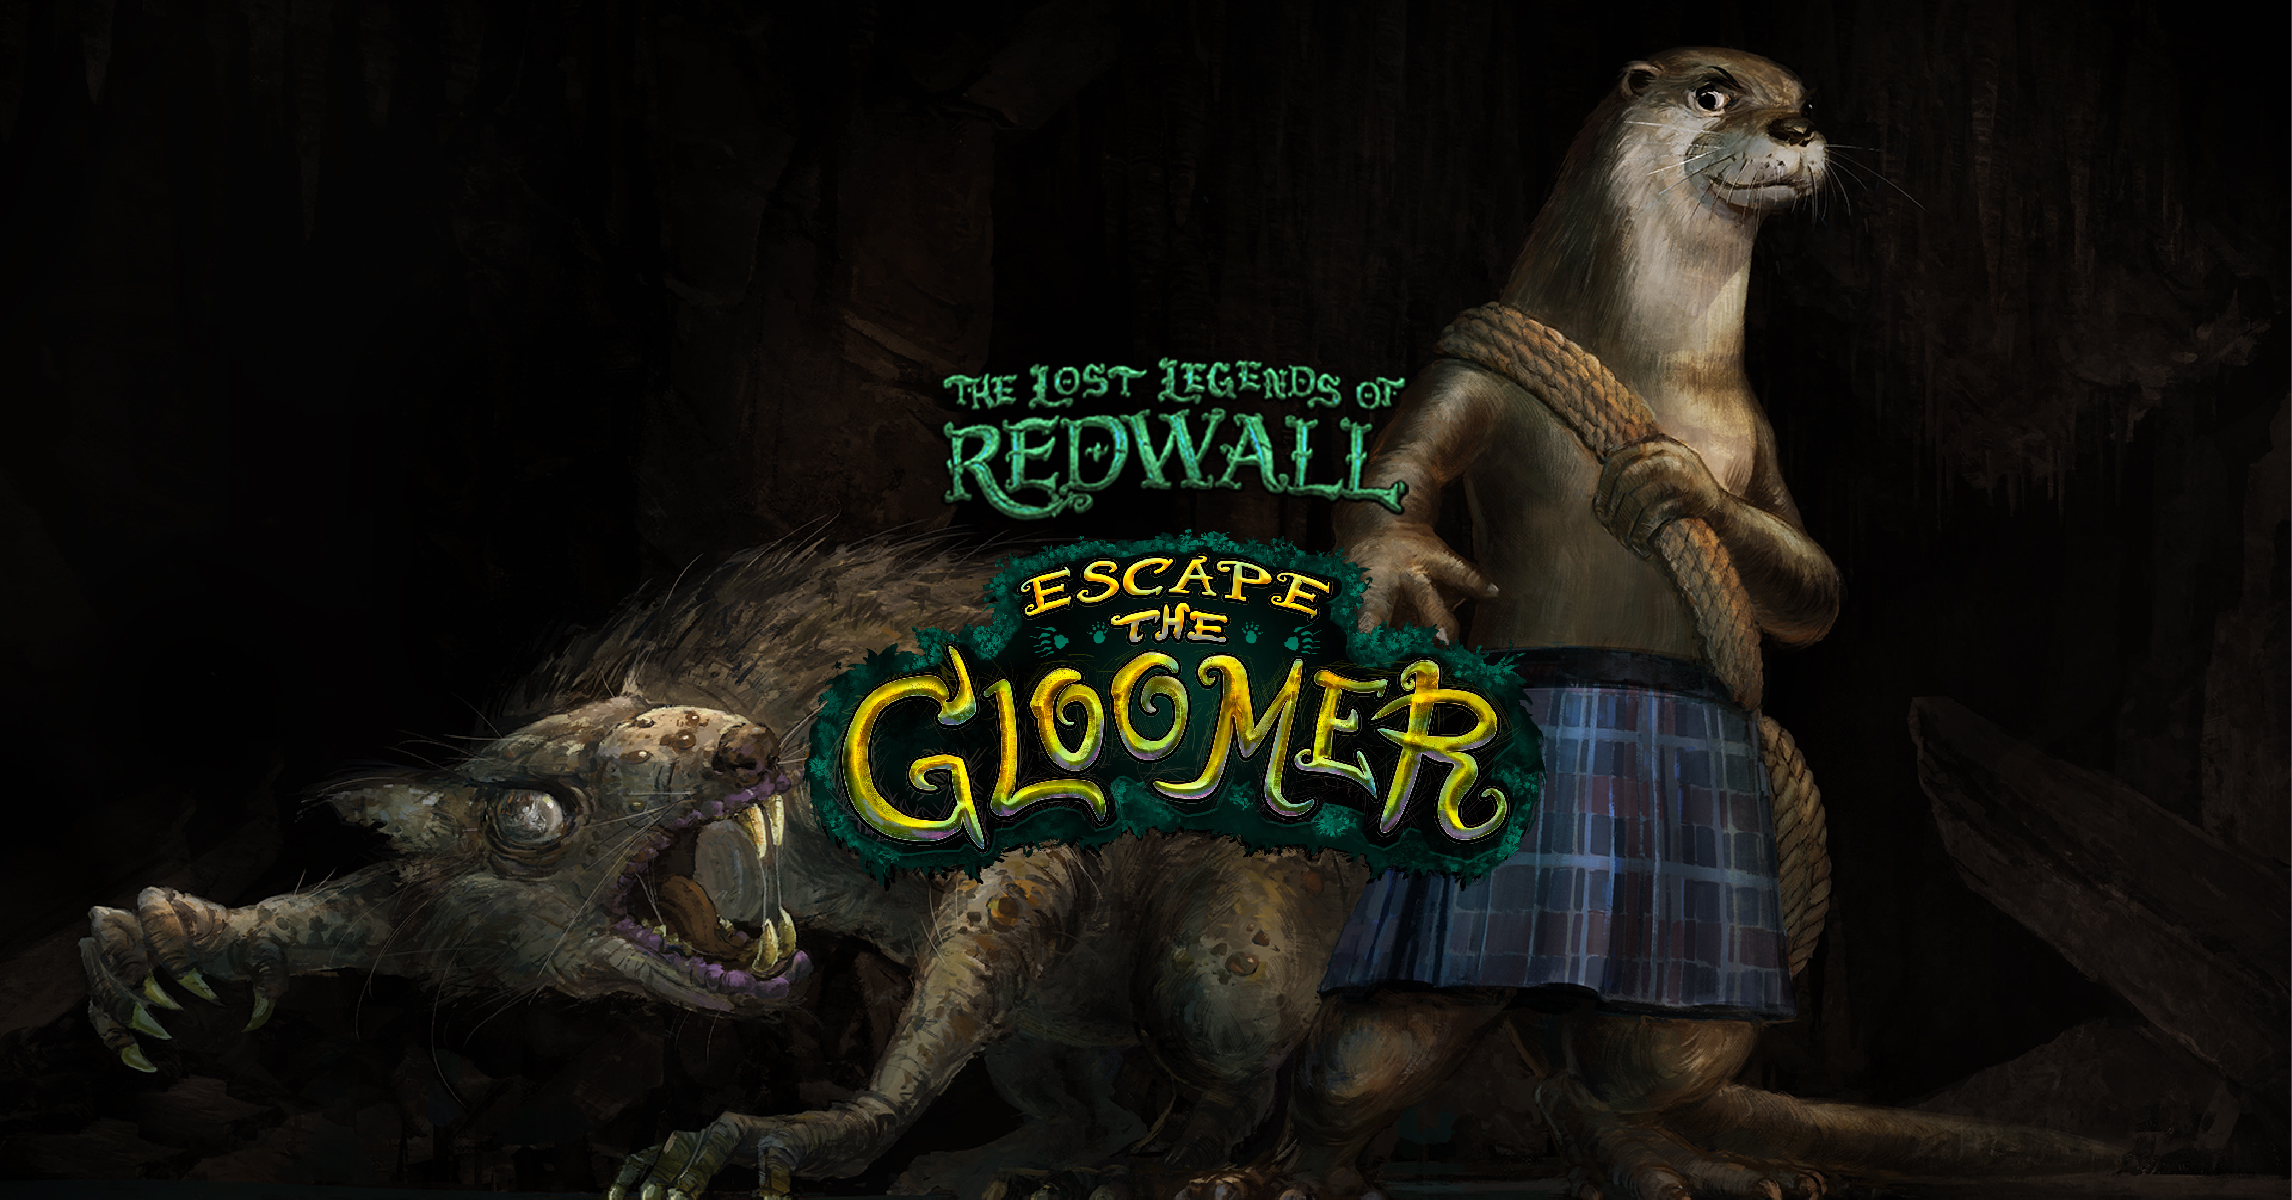 The lost legends of redwall. The Lost Legends of Redwall™: Escape the Gloomer. The Lost Legends of Redwall Asmodeus. The Lost Legends of the Redvall.